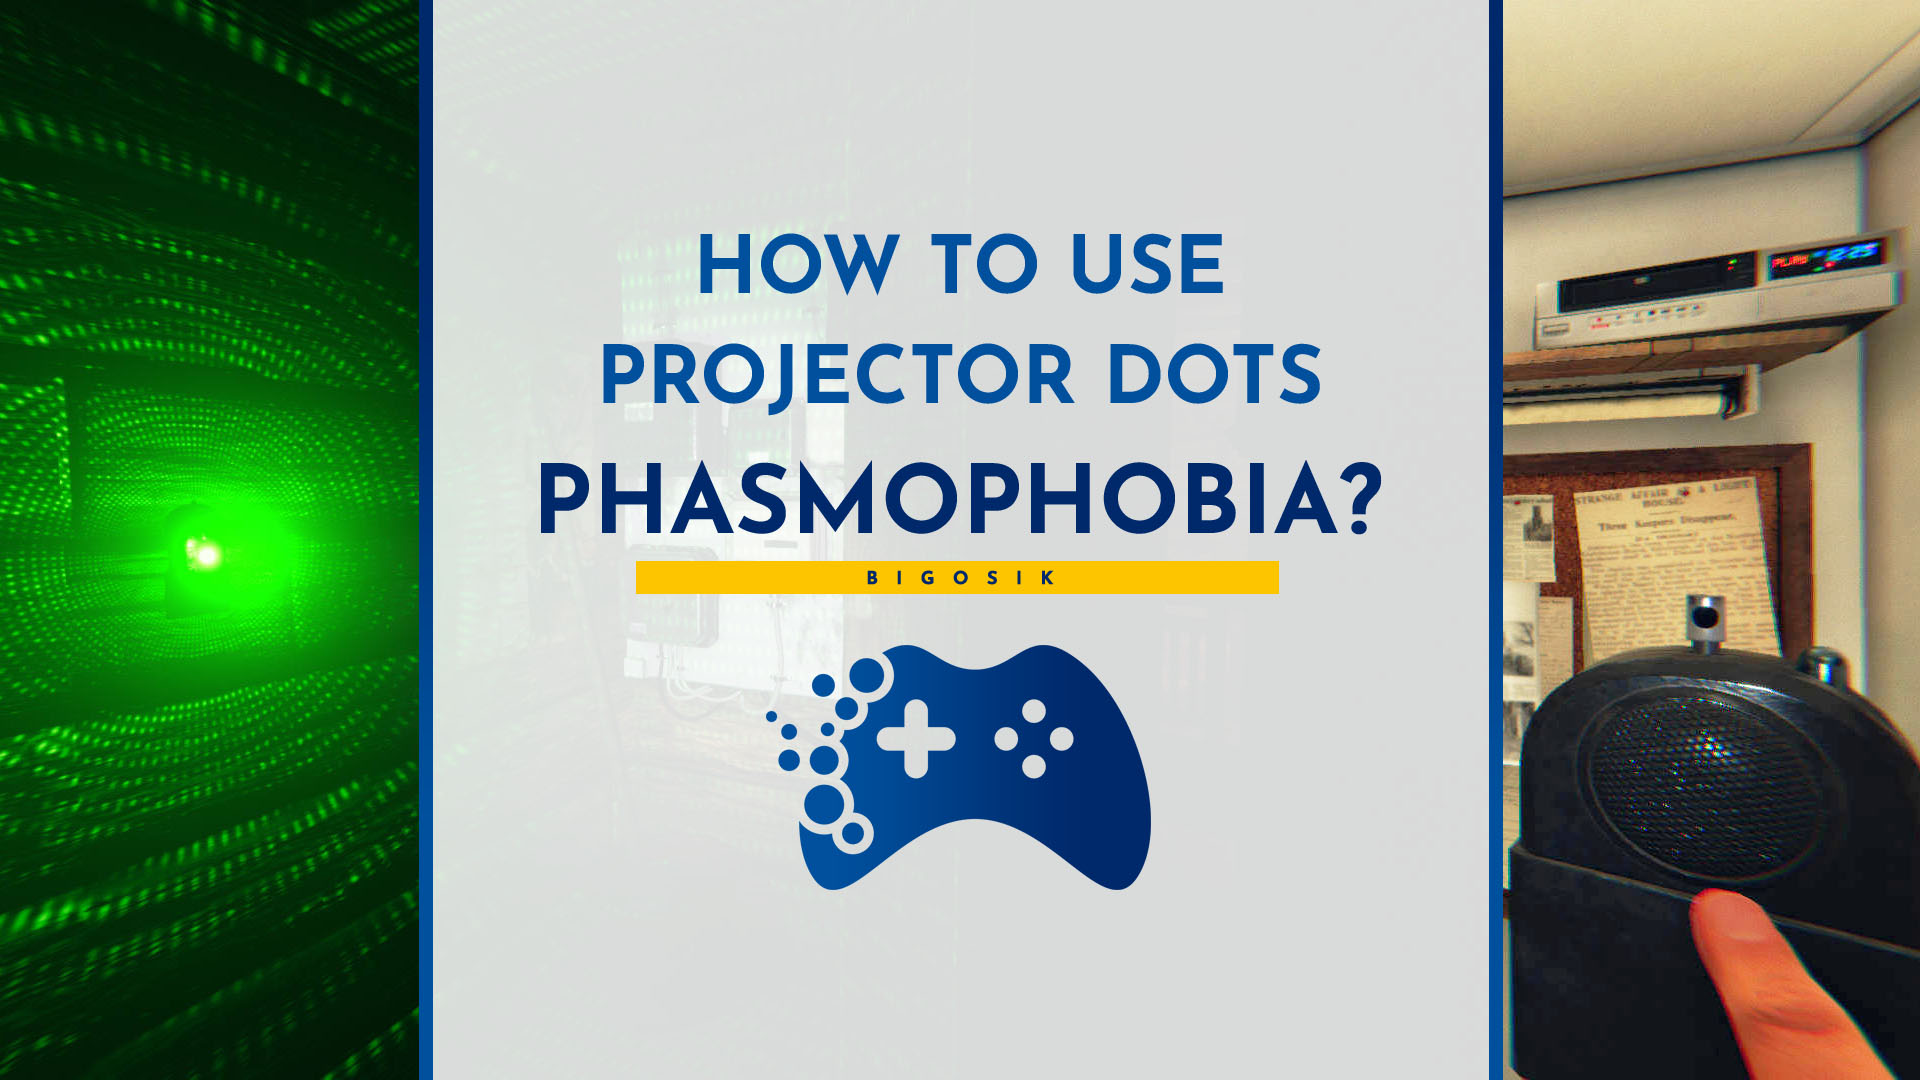 phasmophobia dots projector how to use